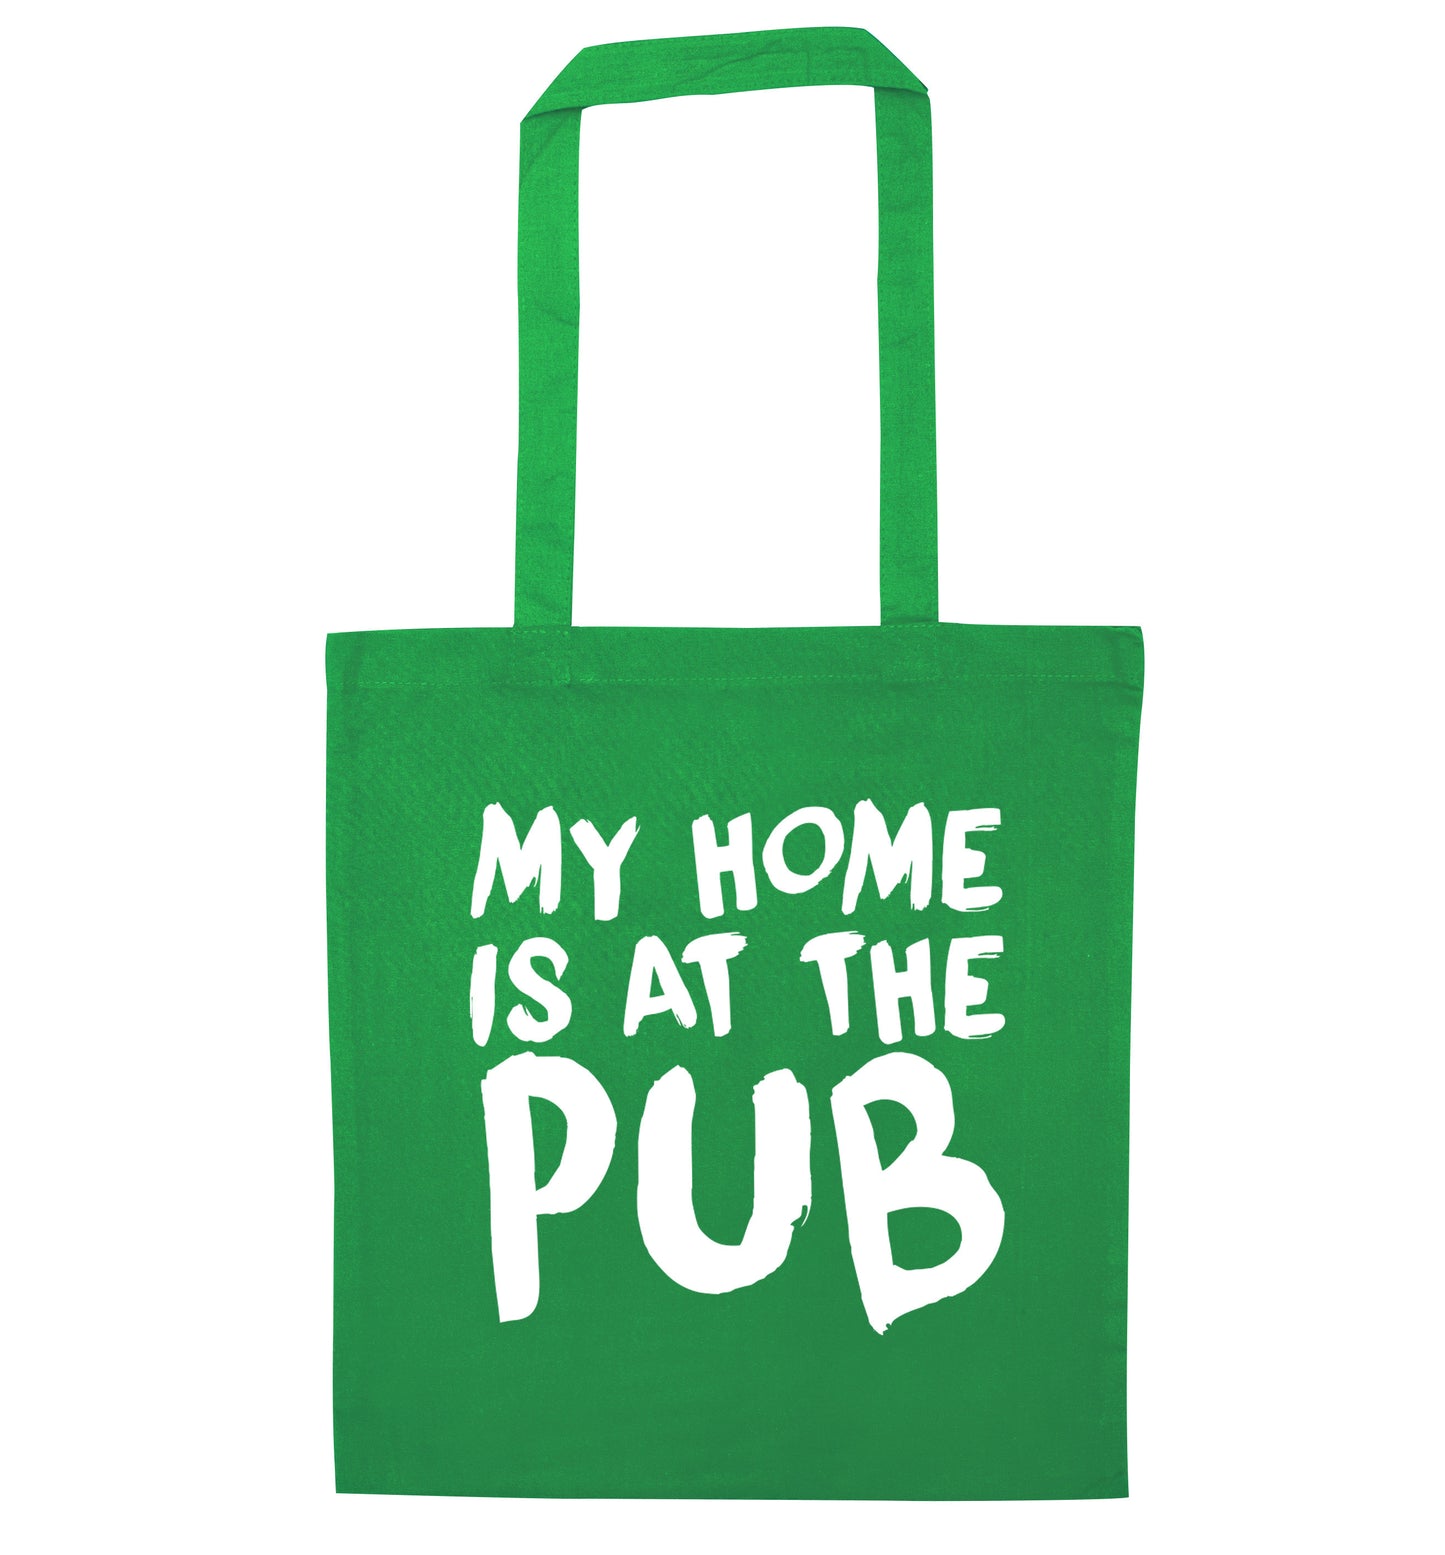 My home is at the pub green tote bag